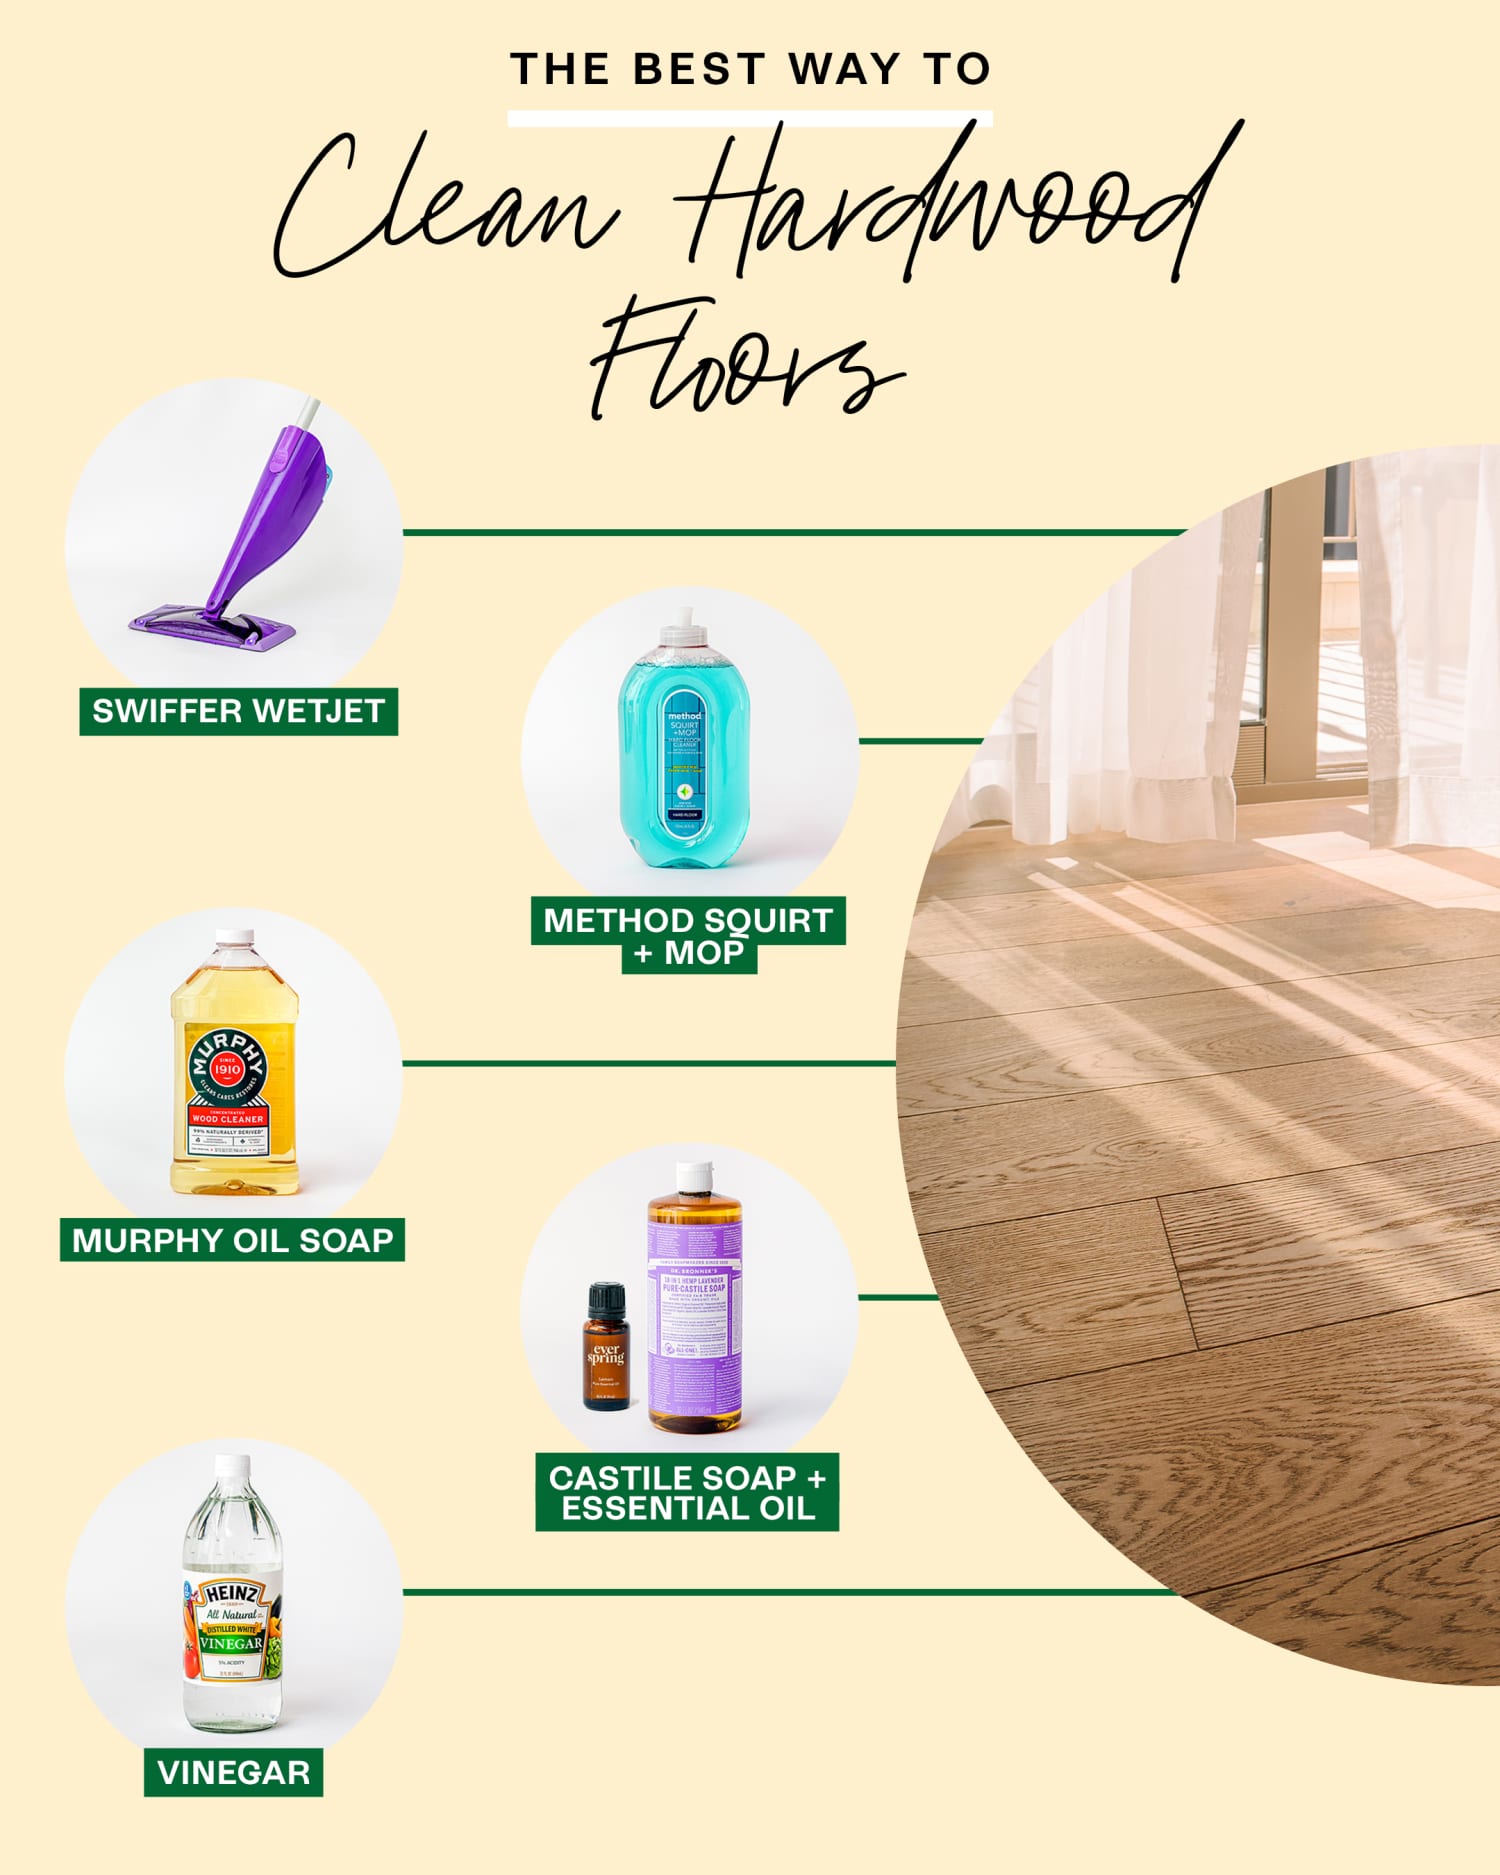 We Tried 5 Methods to Clean a Hardwood Floor — And the Winner Is Ridiculously Simple